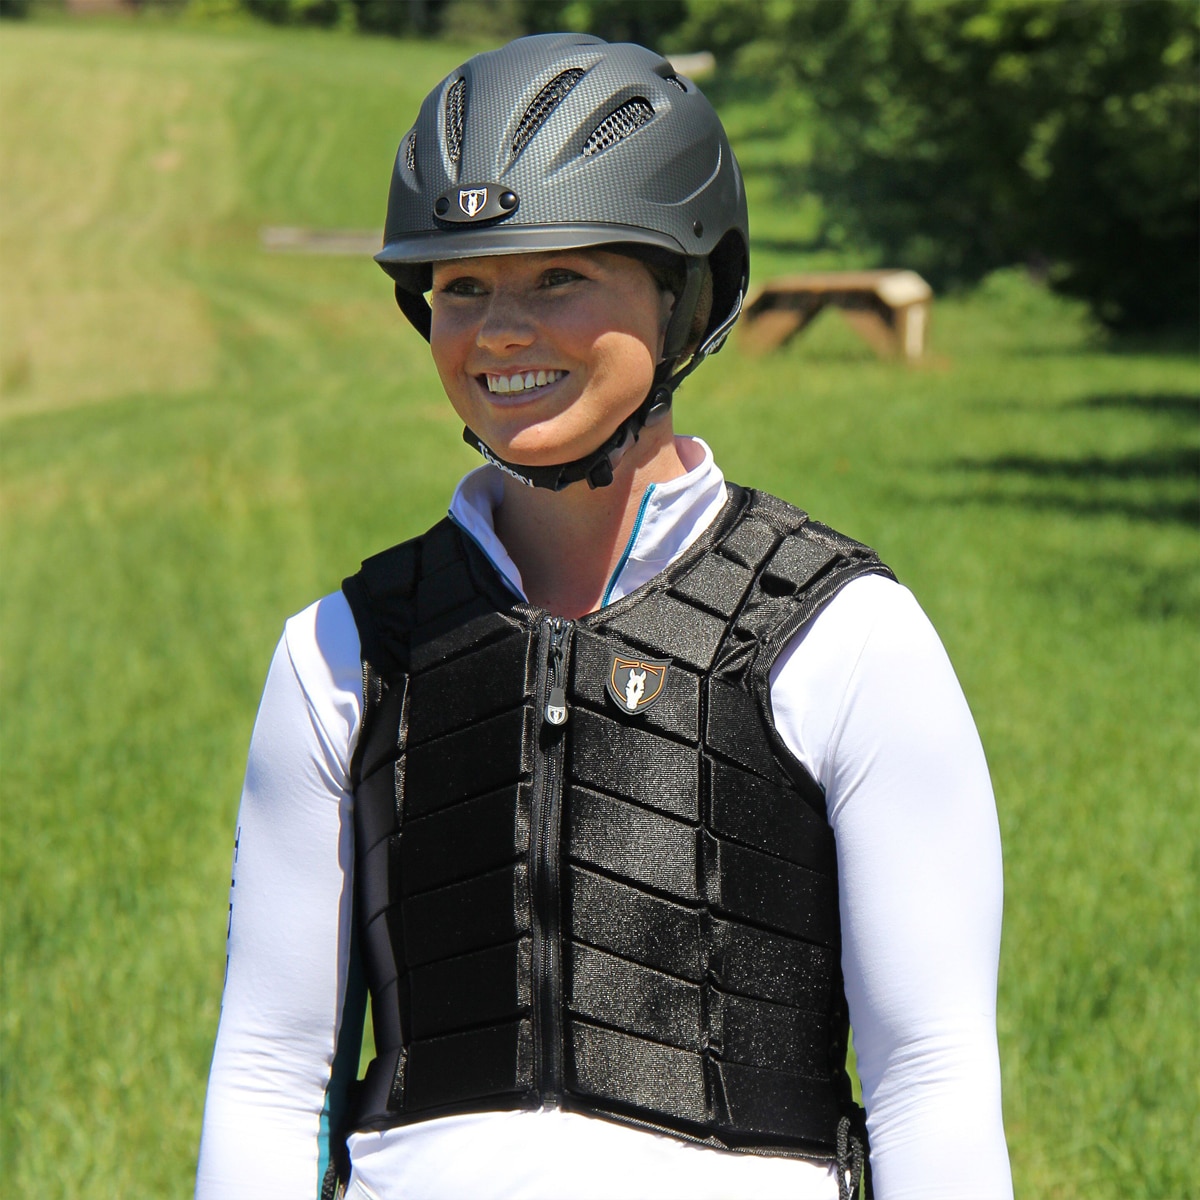 Black Horse Riding Body Protector Equestrian Eventer Safety Vest Adult S 